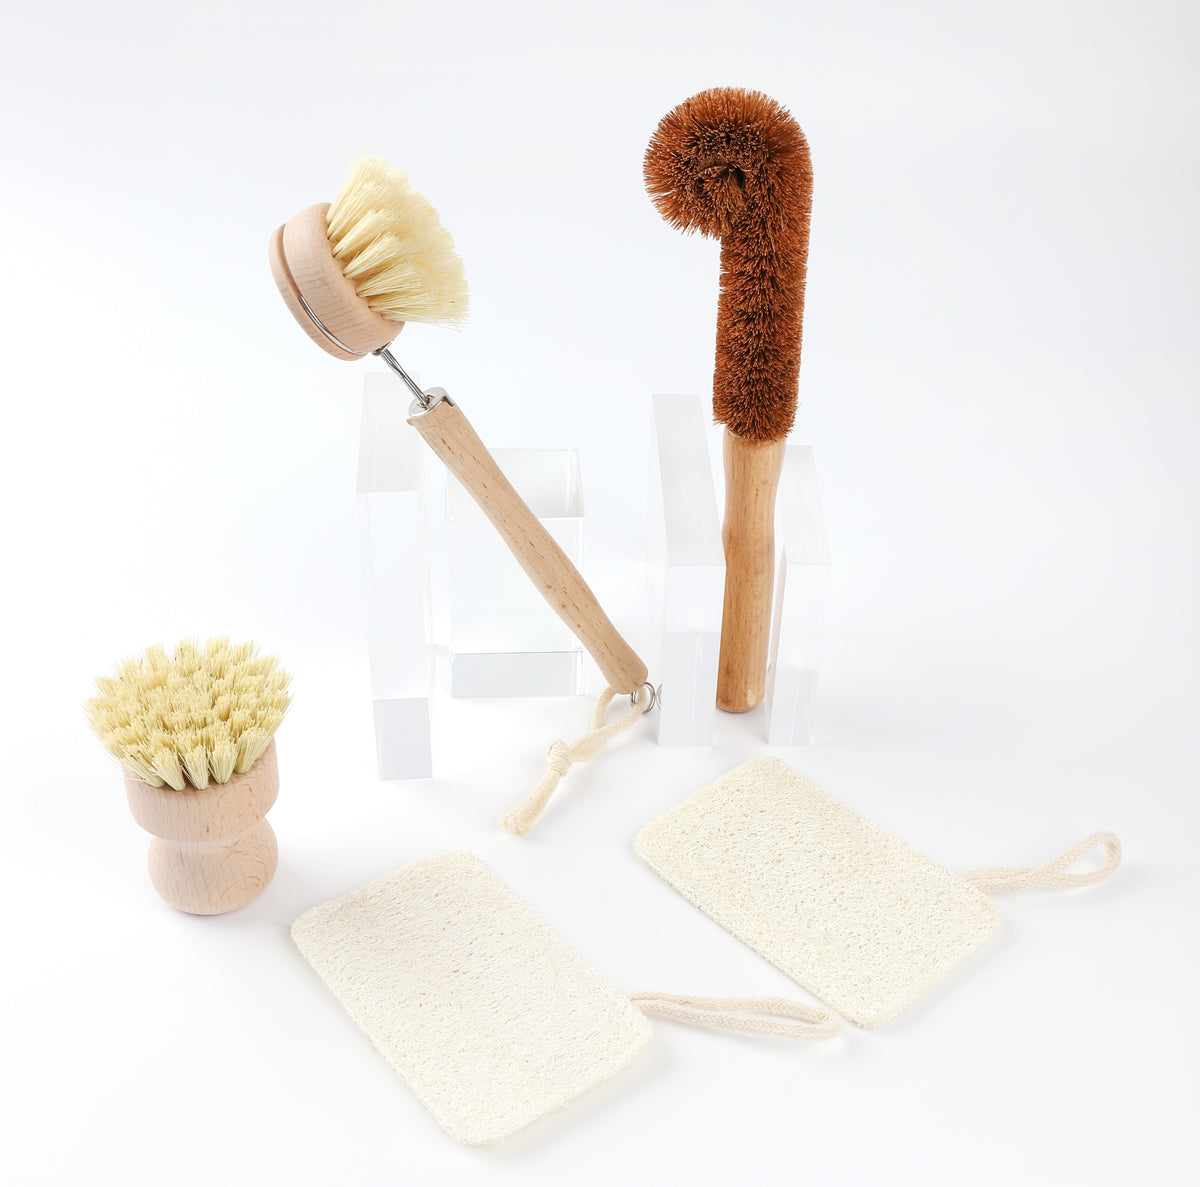 Wooden Dish Brush & Eco Sponge Set - Eco Friendly Cleaning Products -  Low-Waste Wooden Dish Washing Brush - Dish Brush Set with 3 Replacement  Heads 